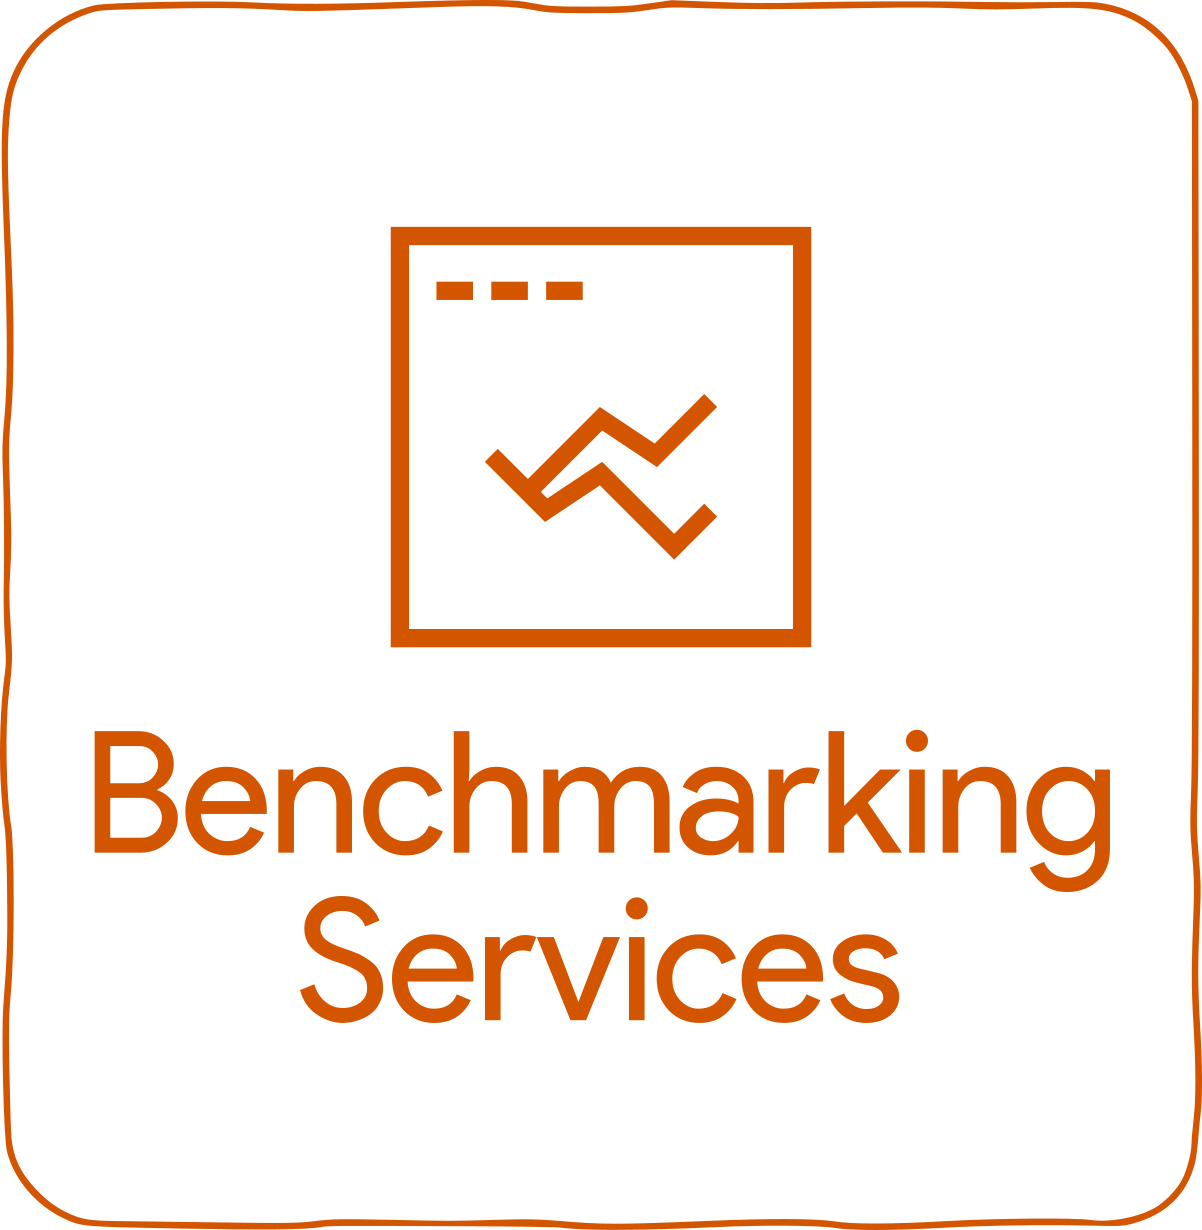 Benchmarking Services